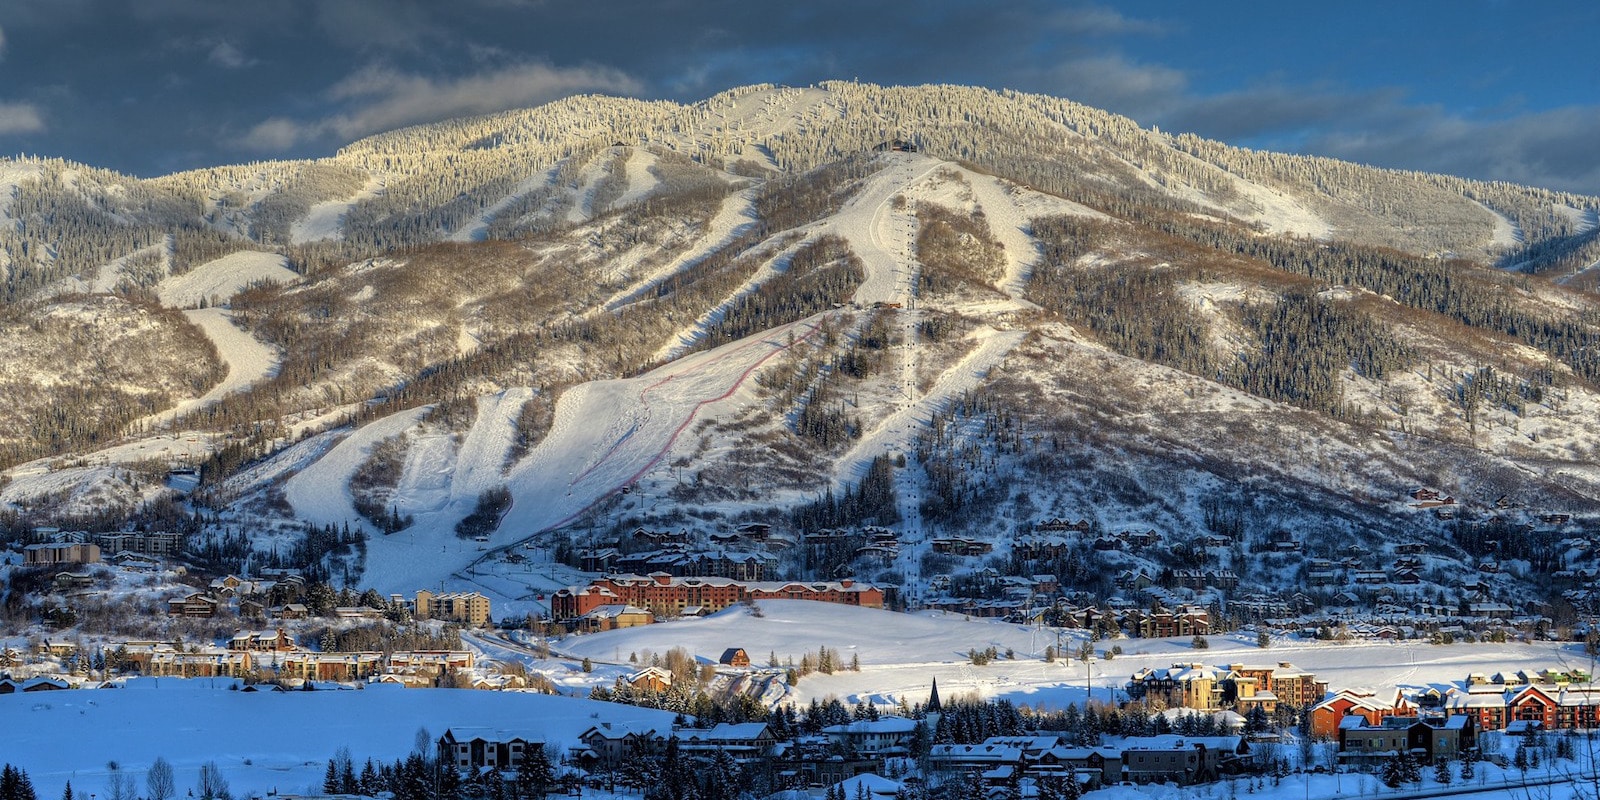 Image of ski trails at Steamboat Resort in Colorado